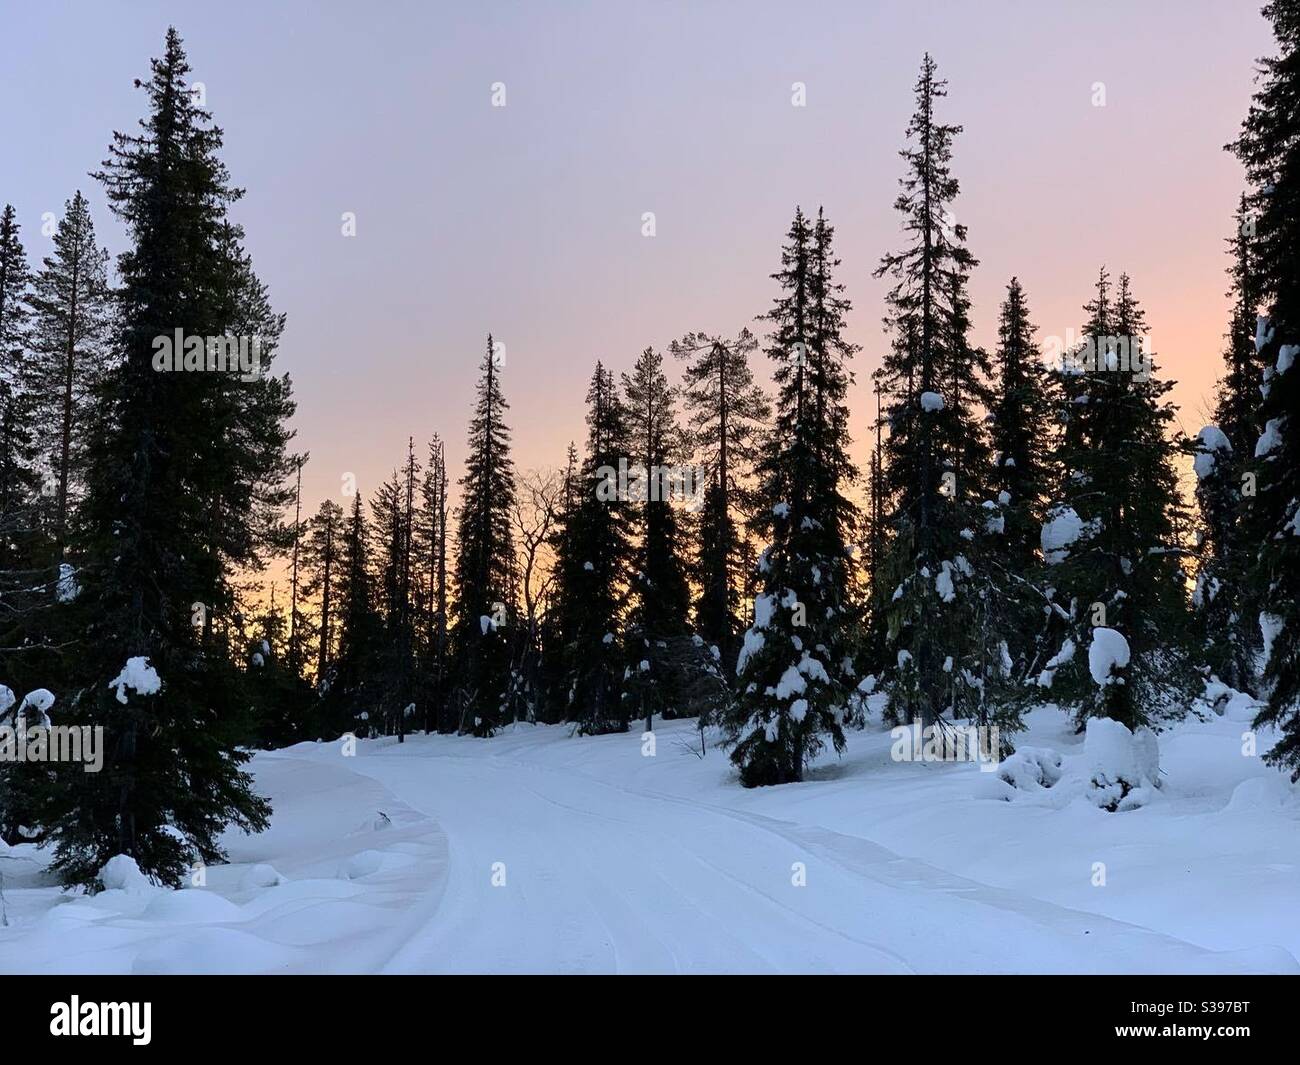 Snowy Forest at Sunrise in Pyhä-Luosto National Park, Finland Stock Photo